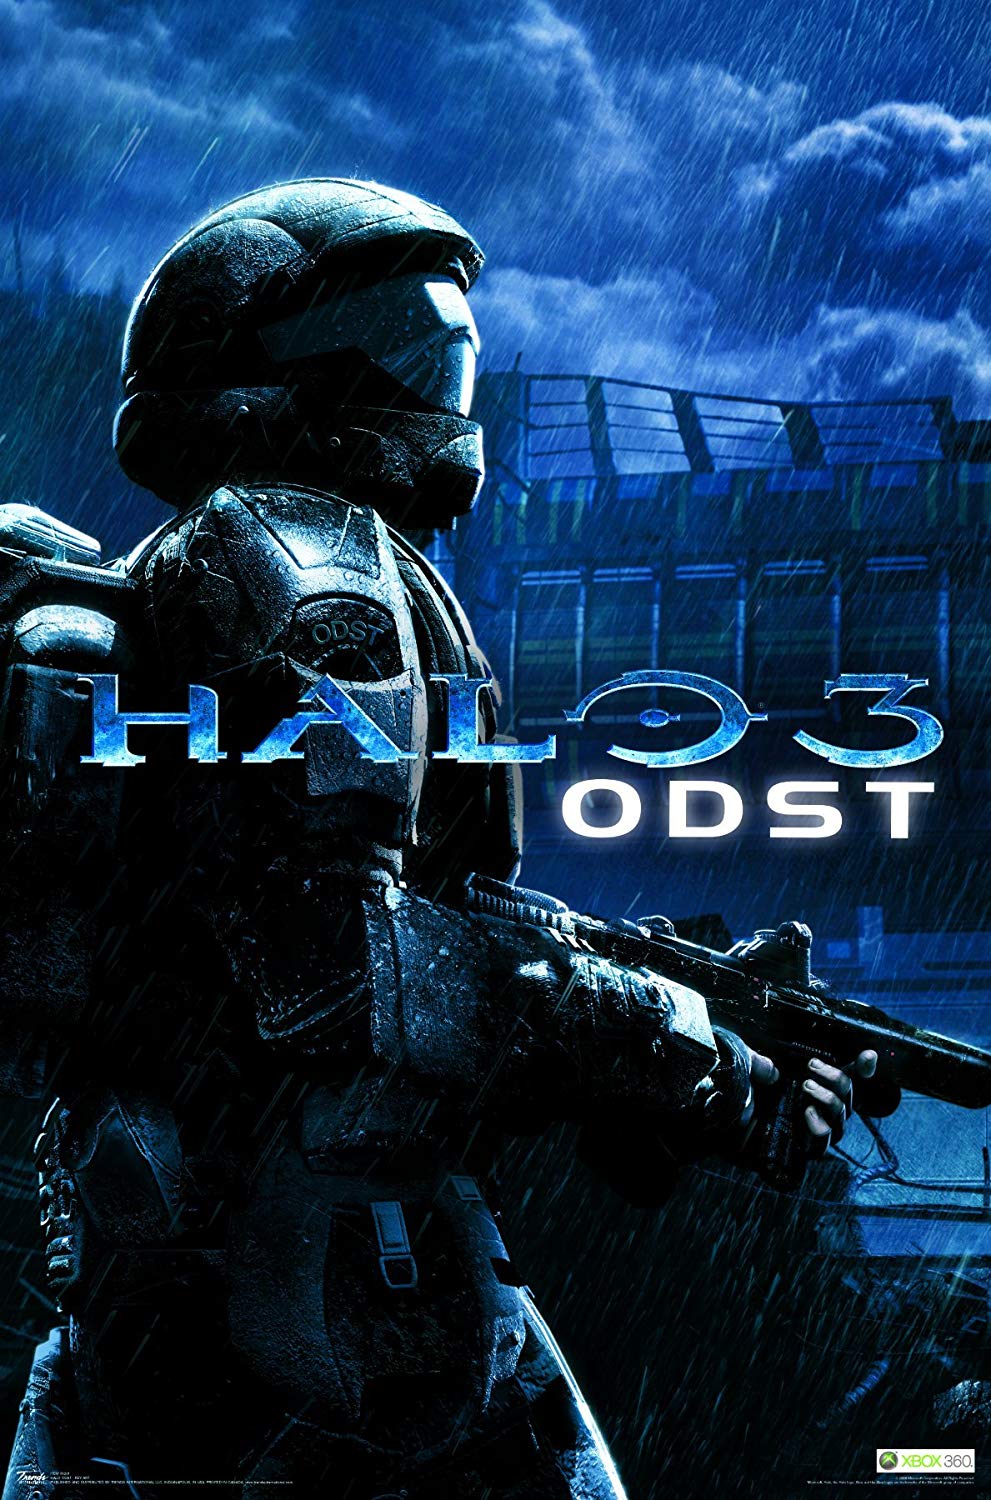 Blue and White ODST Logo - Halo 3: ODST (Video Game 2009) - IMDb